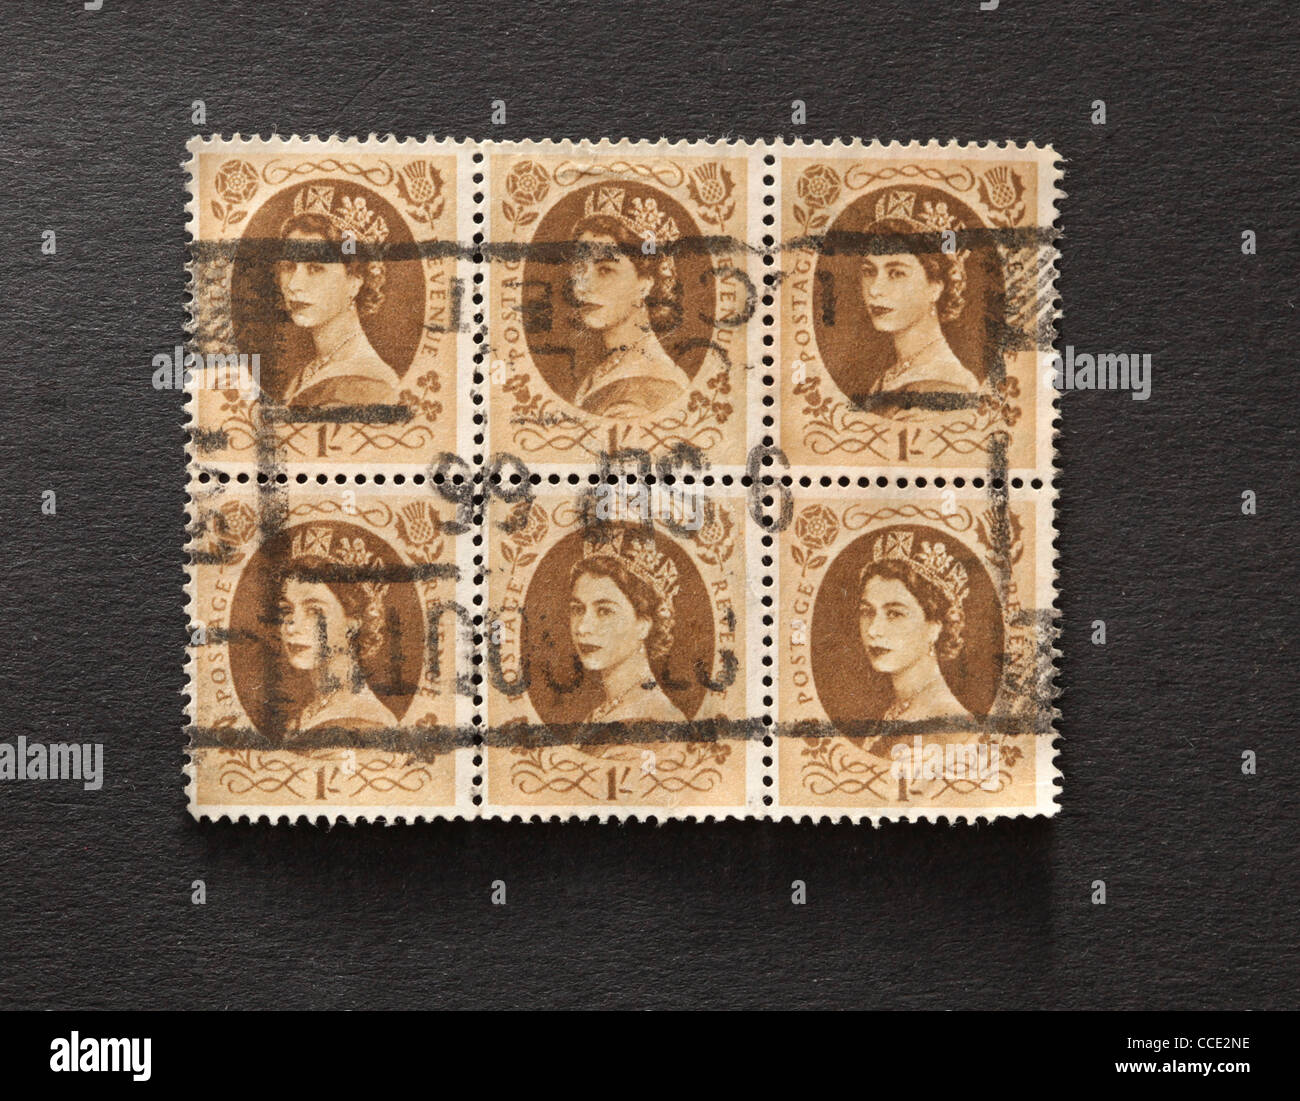 Block of six vintage identical postage stamps with Queen Elizabeth Stock Photo